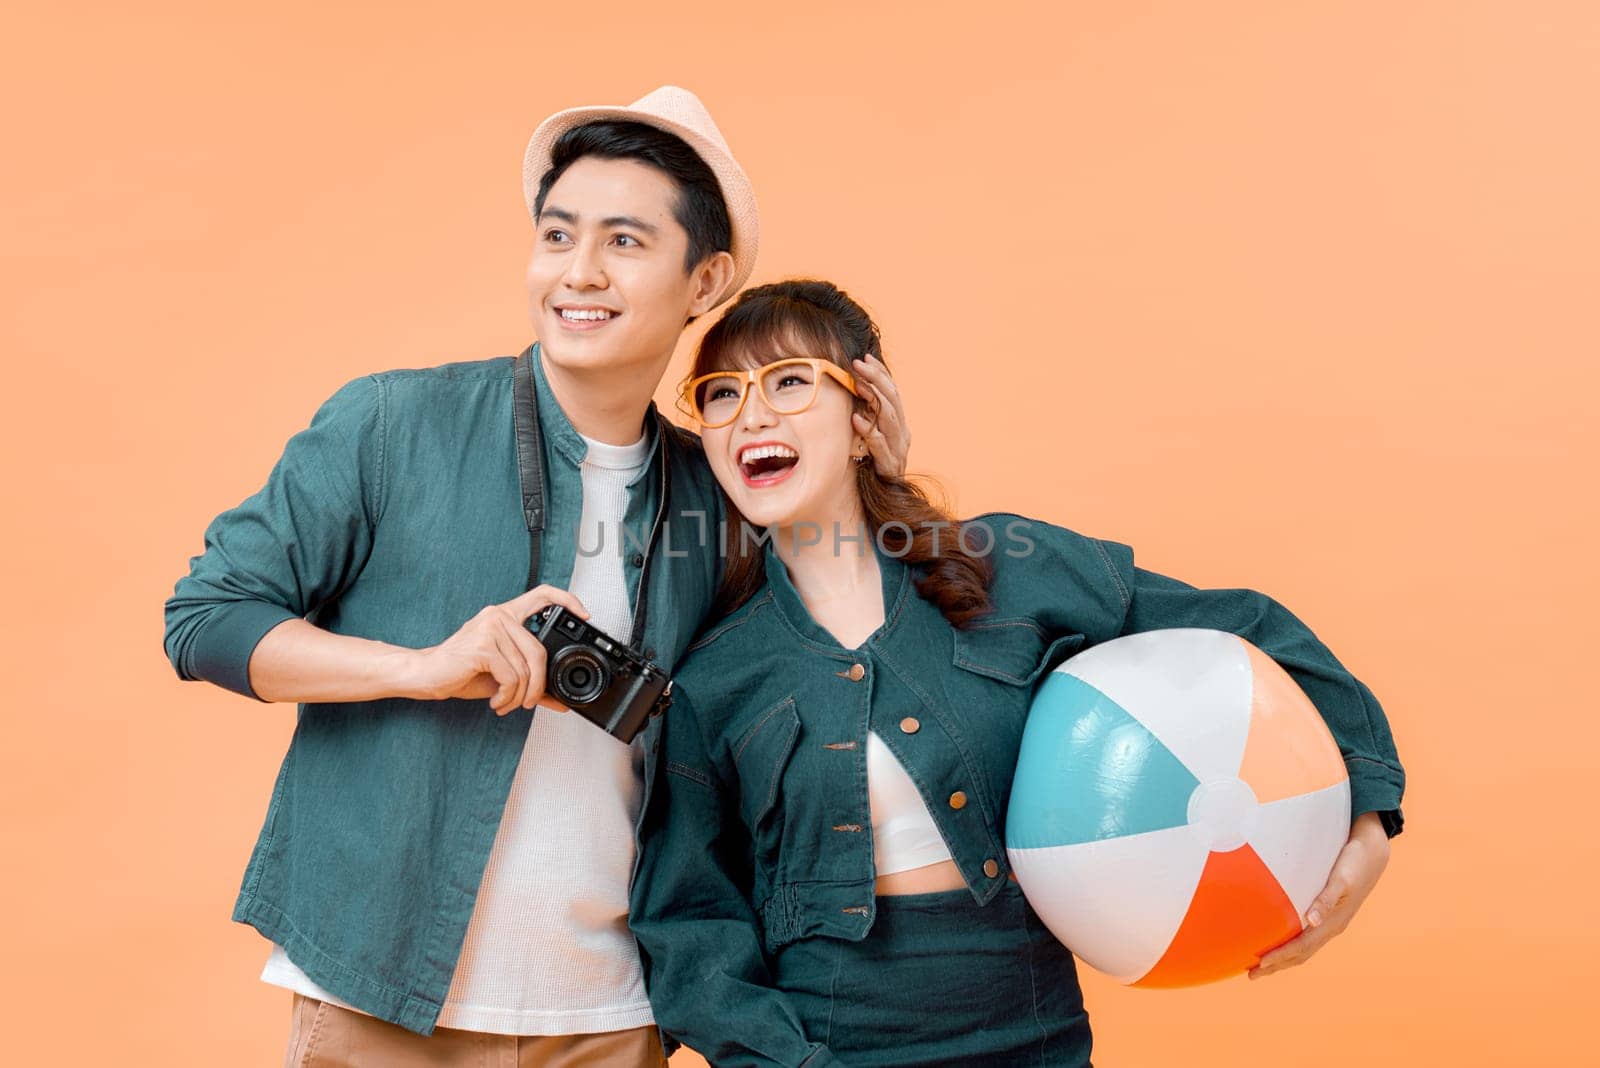 Young couple on a yellow background having fun with a beachball.